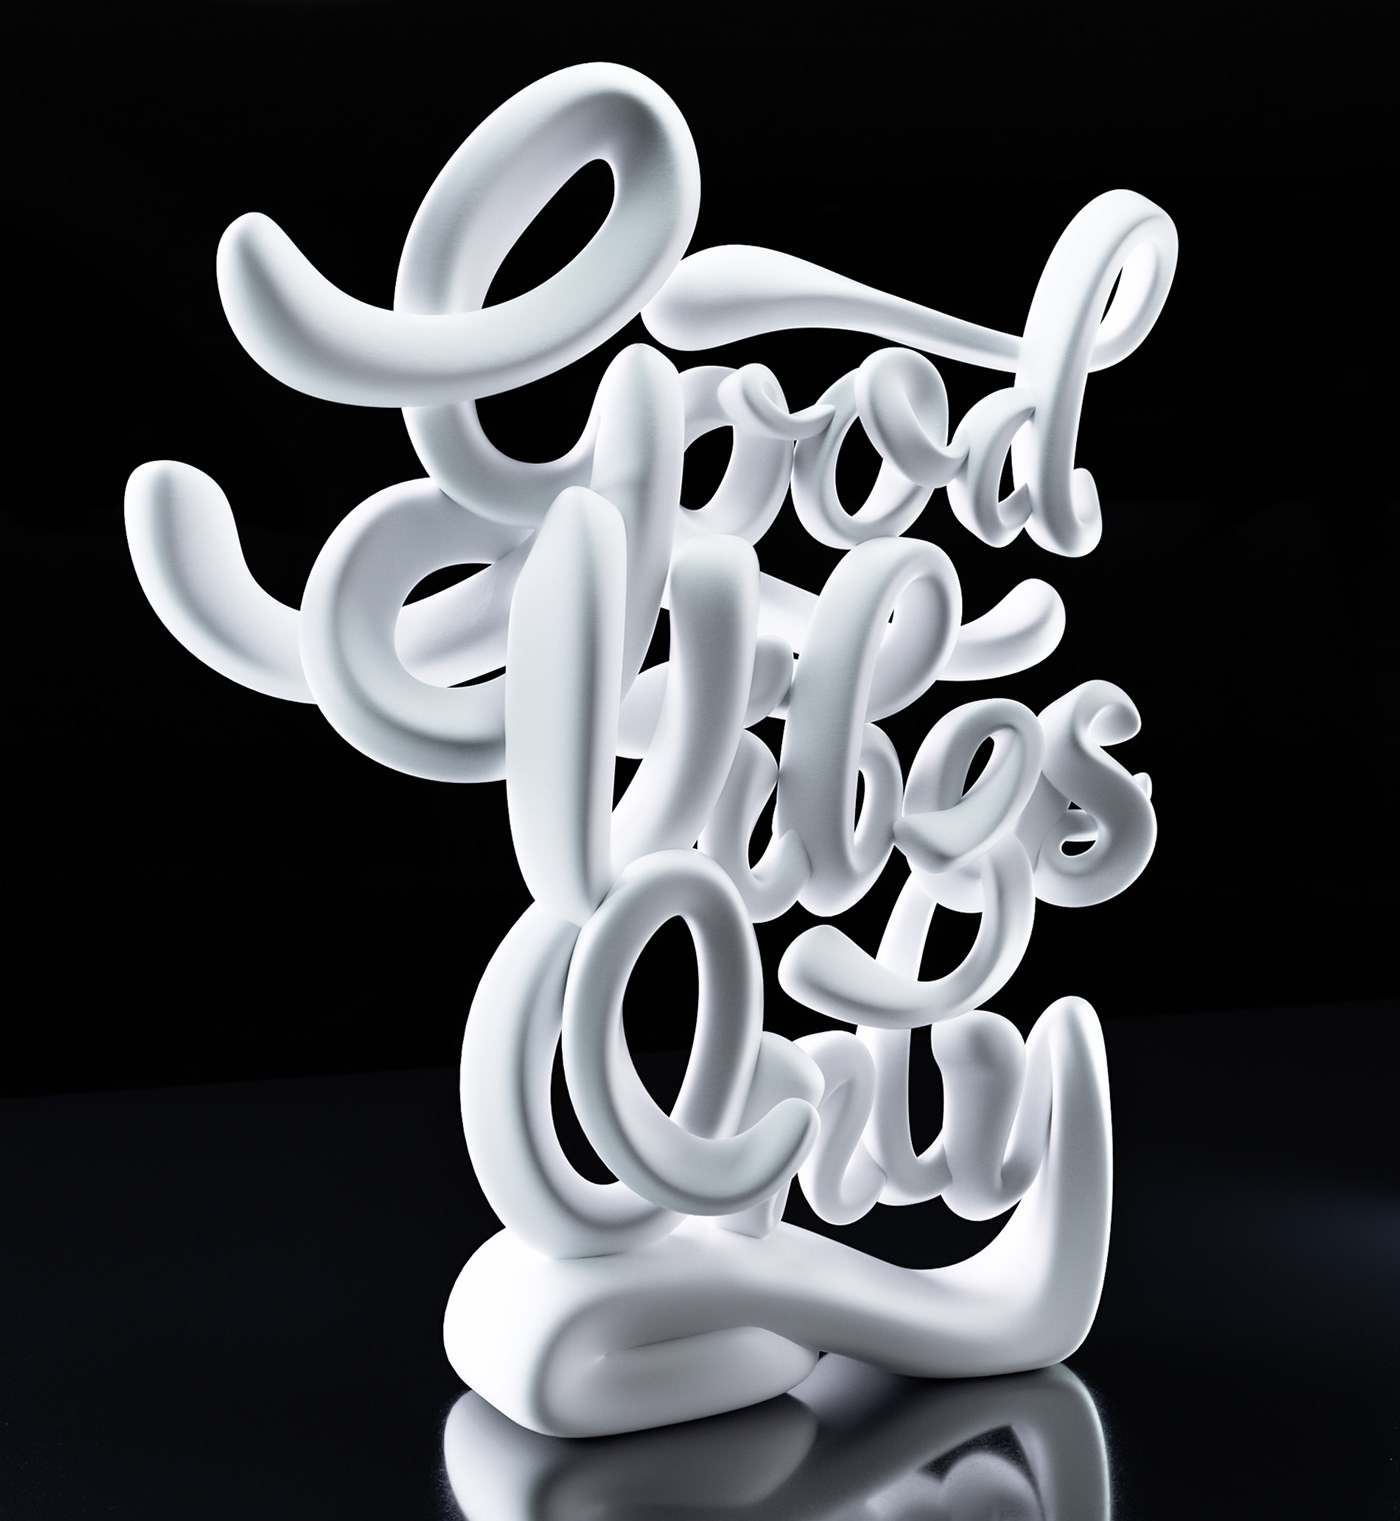 Only 3d. Каллиграфия и 3д скульптуры. 3d Printed Letter. Steady as she goes, a 3d Printed typographic Sculpture. Renaldo Sculpture Behance.